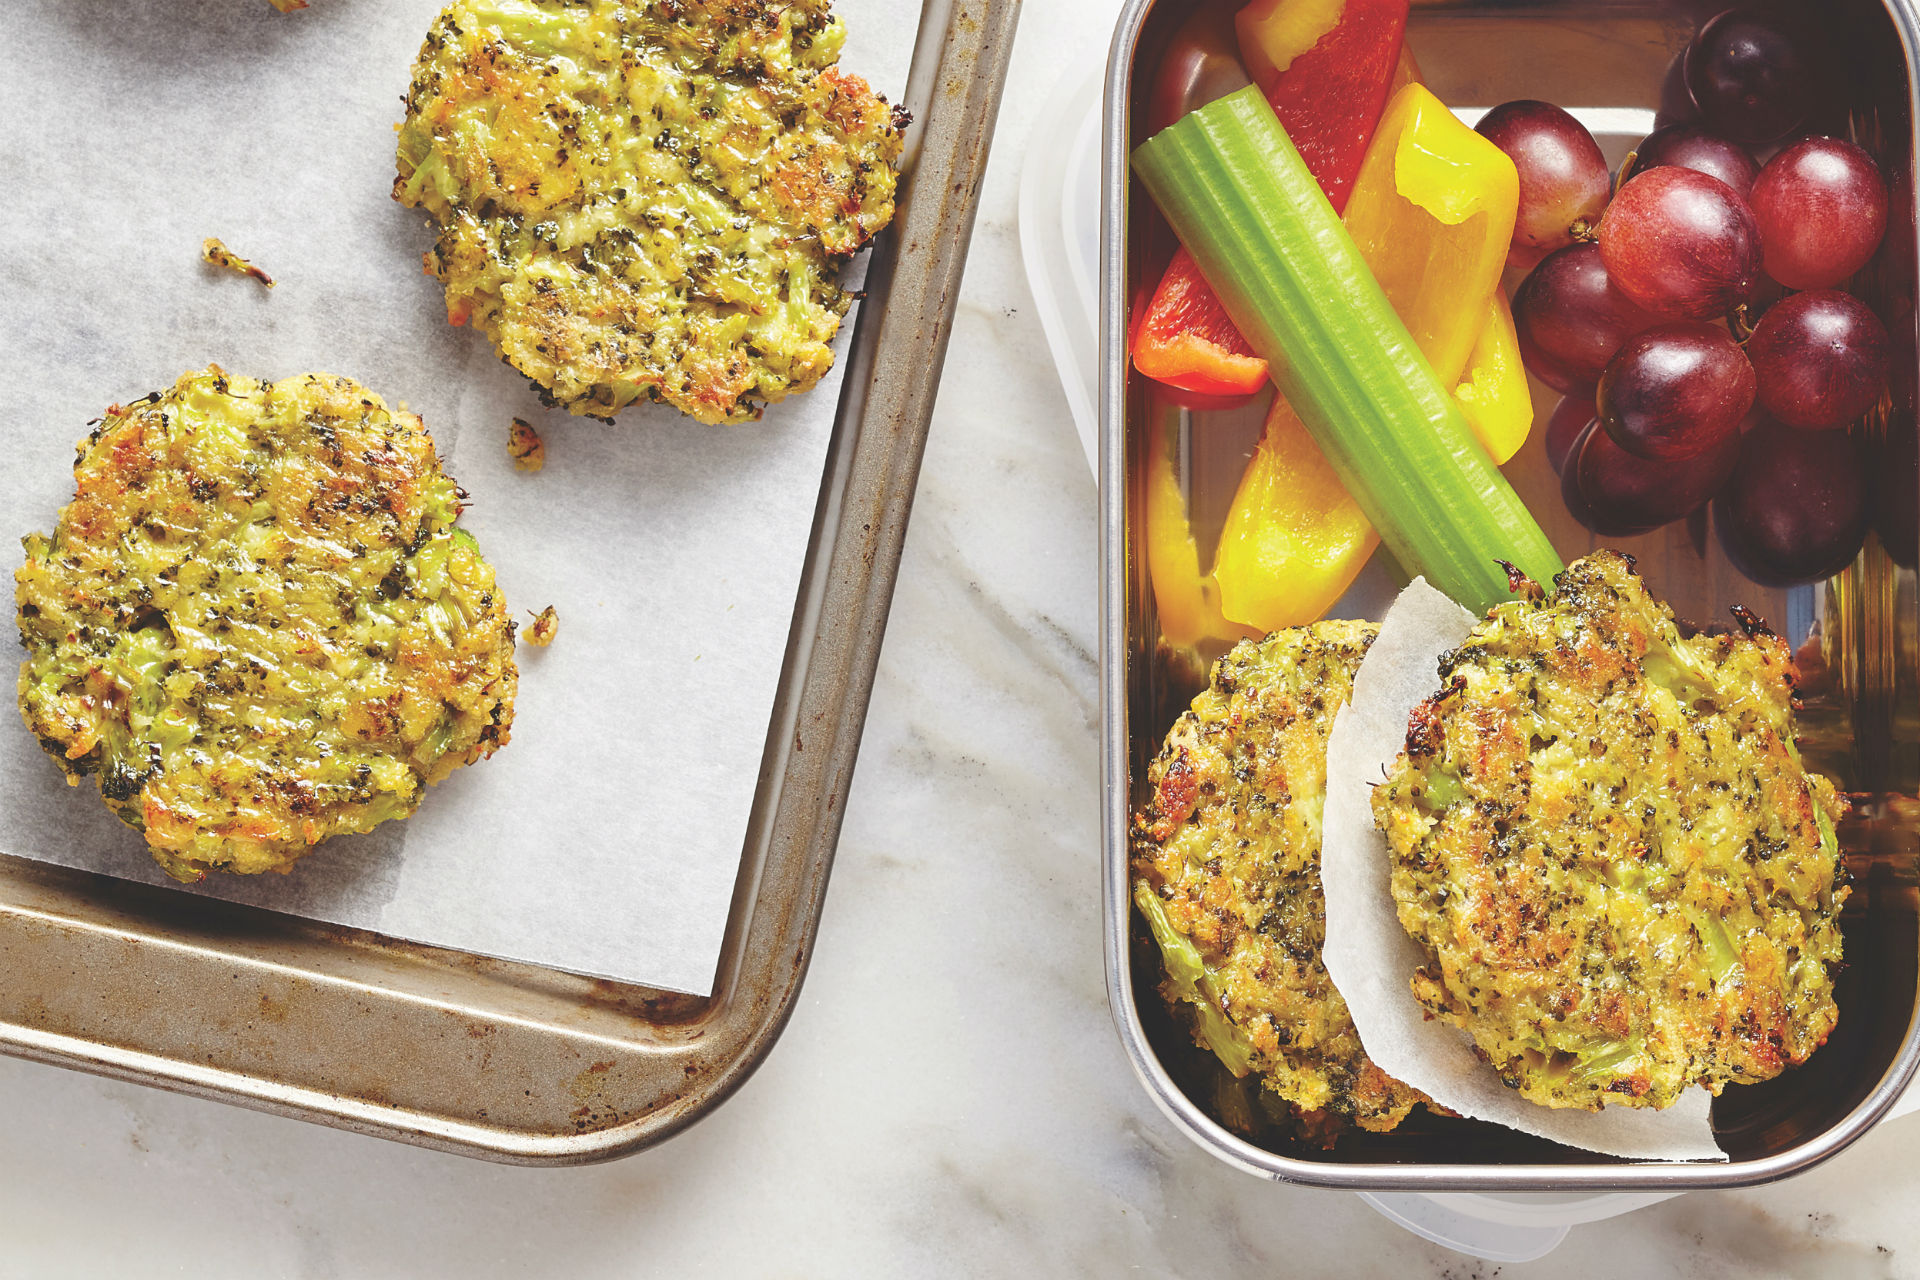 broccoli and cheese patties in a lunch box with fruits and veggies